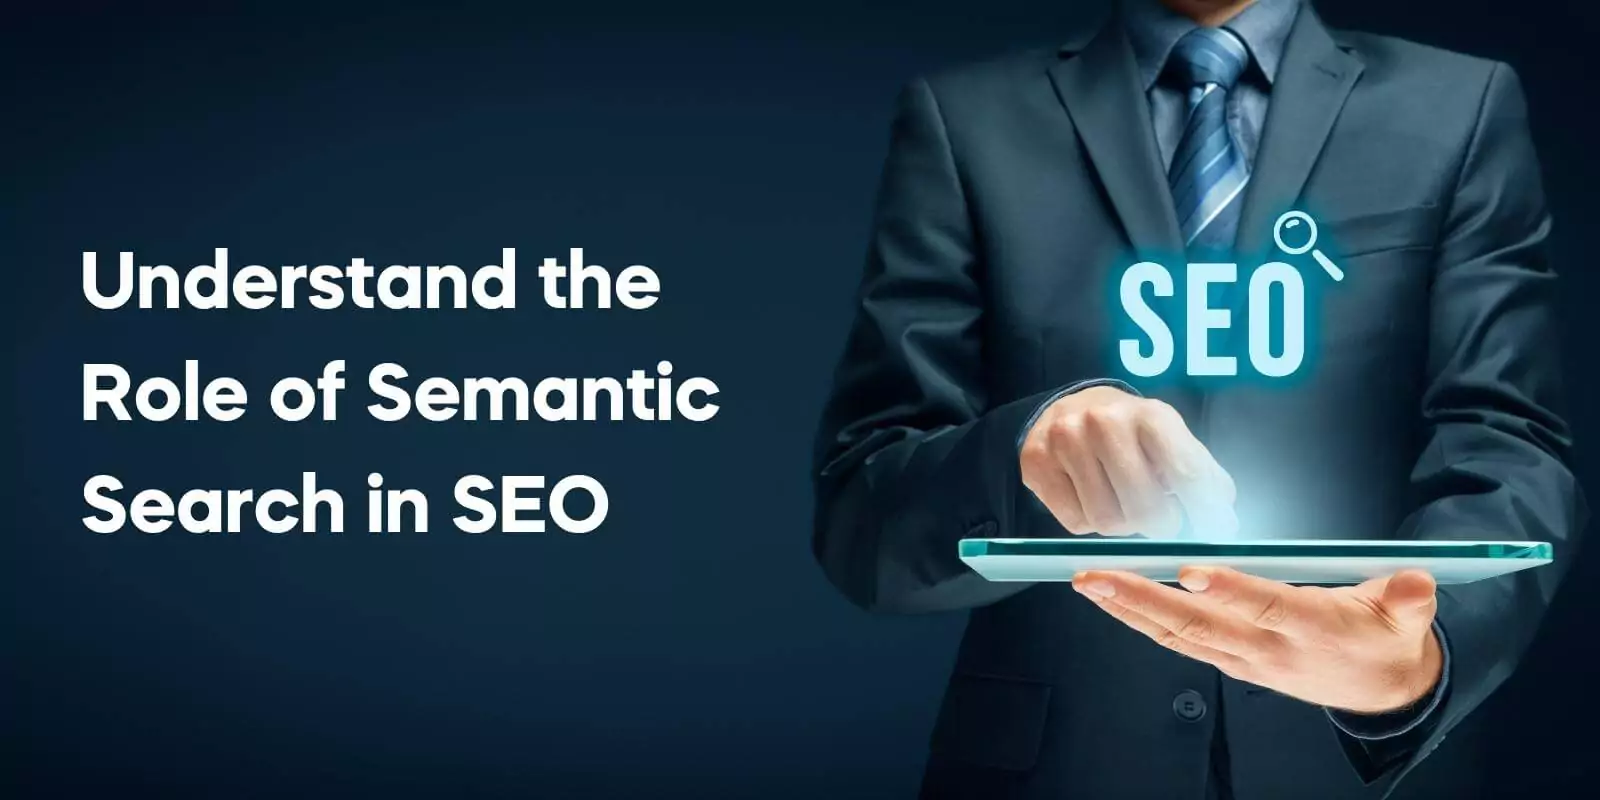 Understand the Role of Semantic Search in SEO